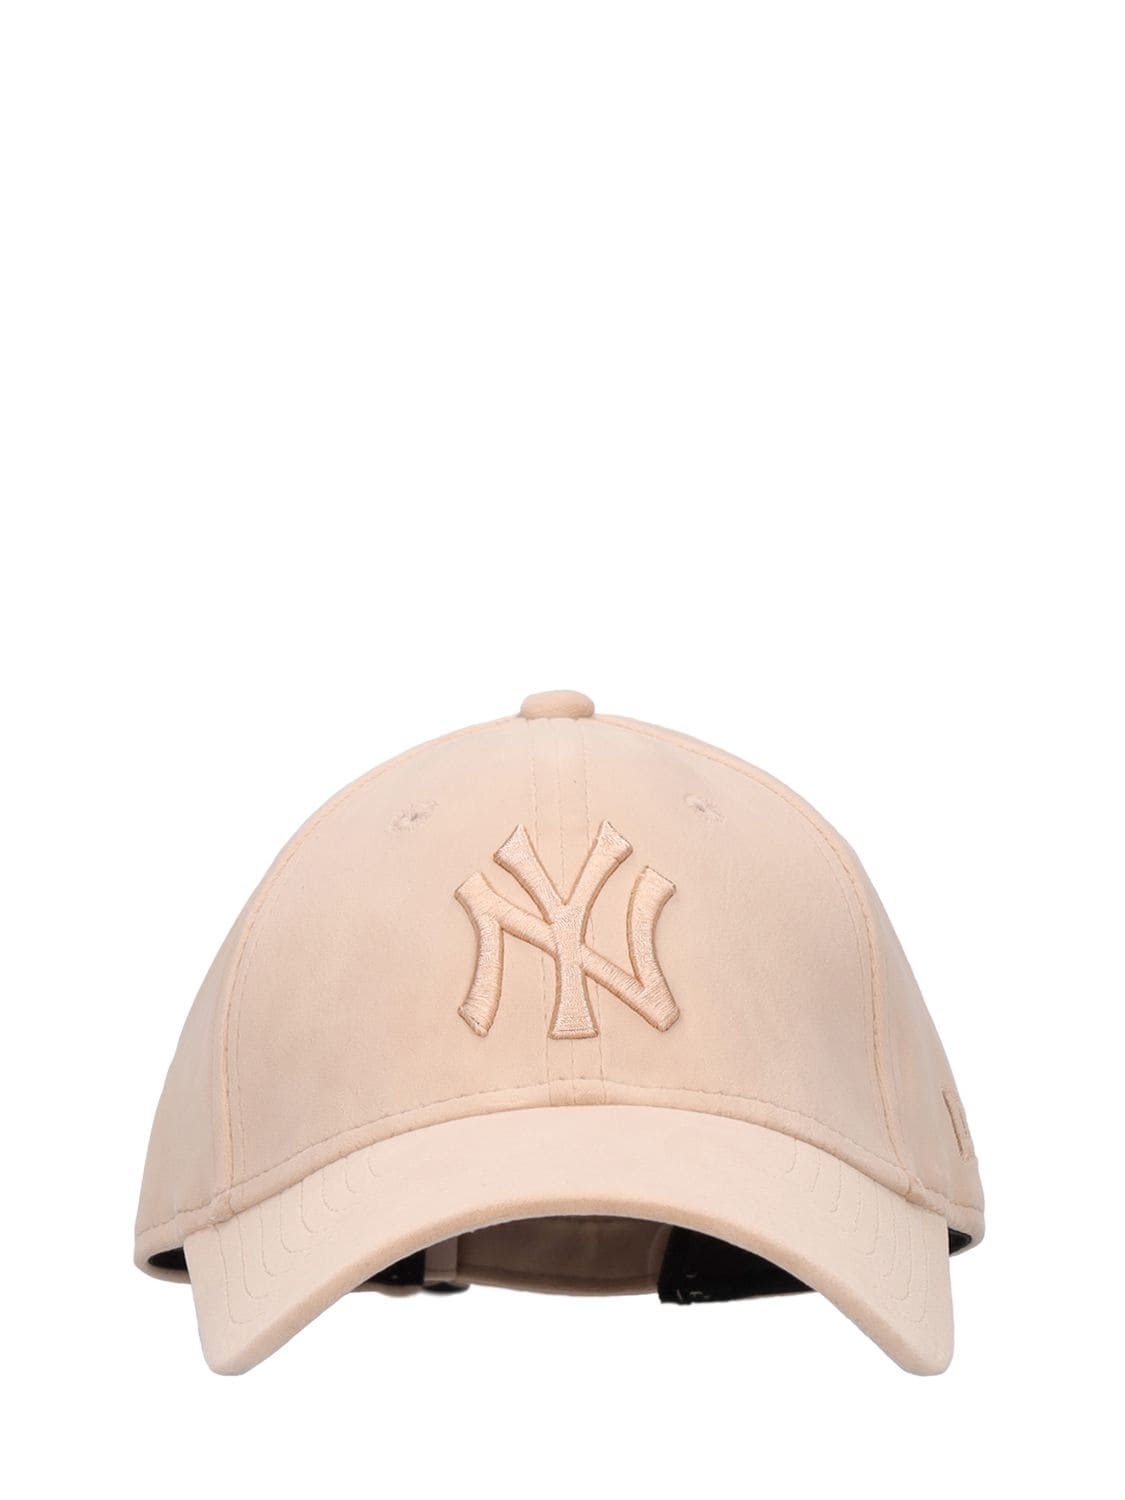 New Era 9forty Ny Yankees Velour Hat In Beige